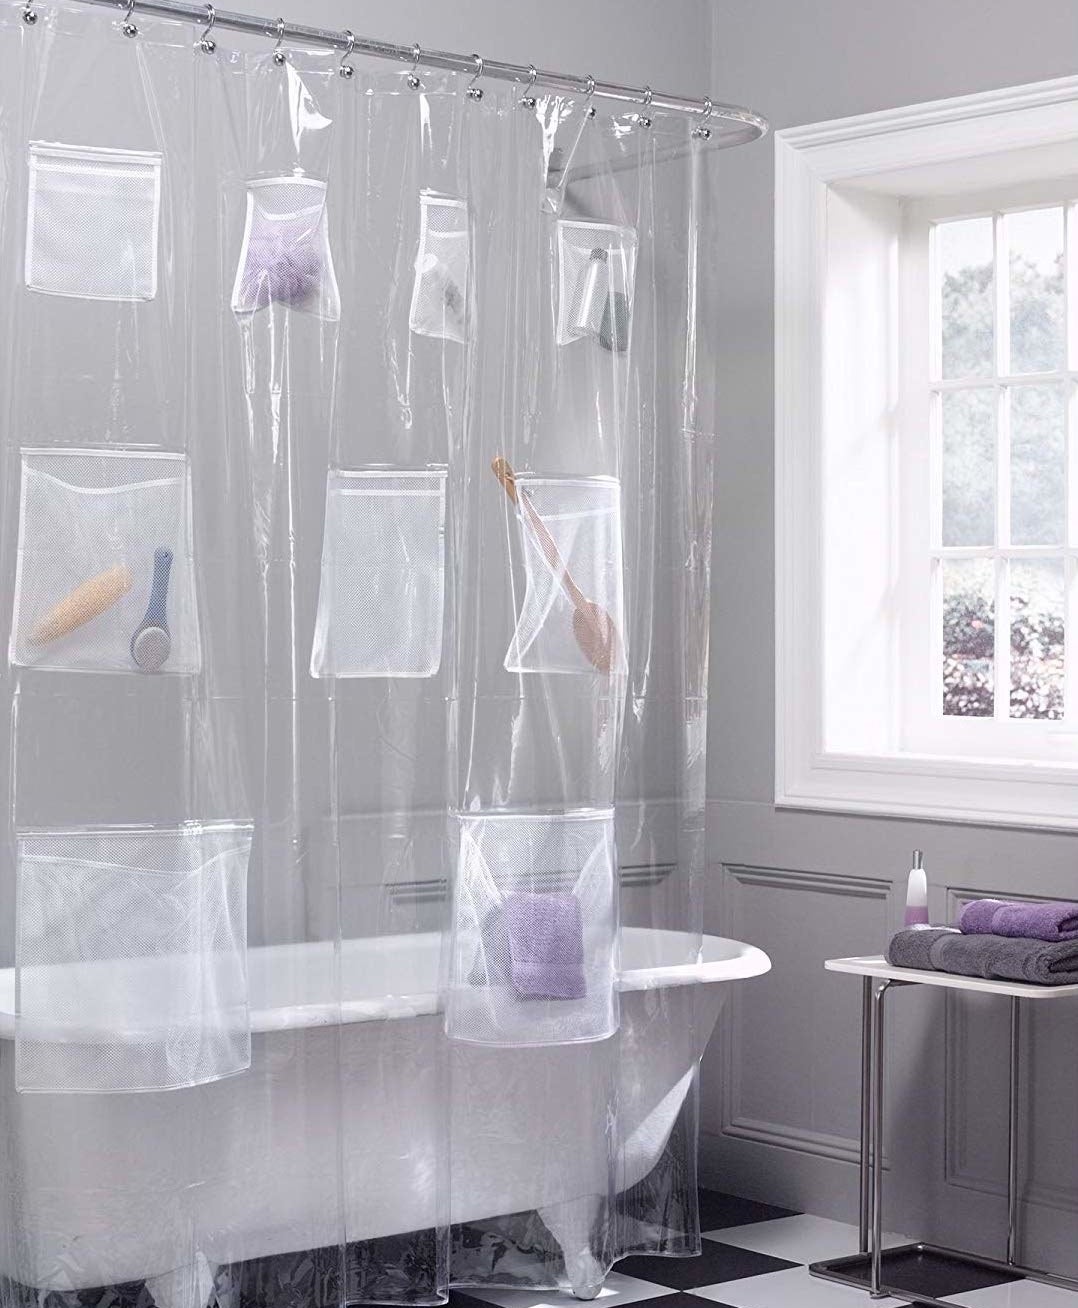 A pocketed shower curtain filled with washcloths, loofahs, and bath products